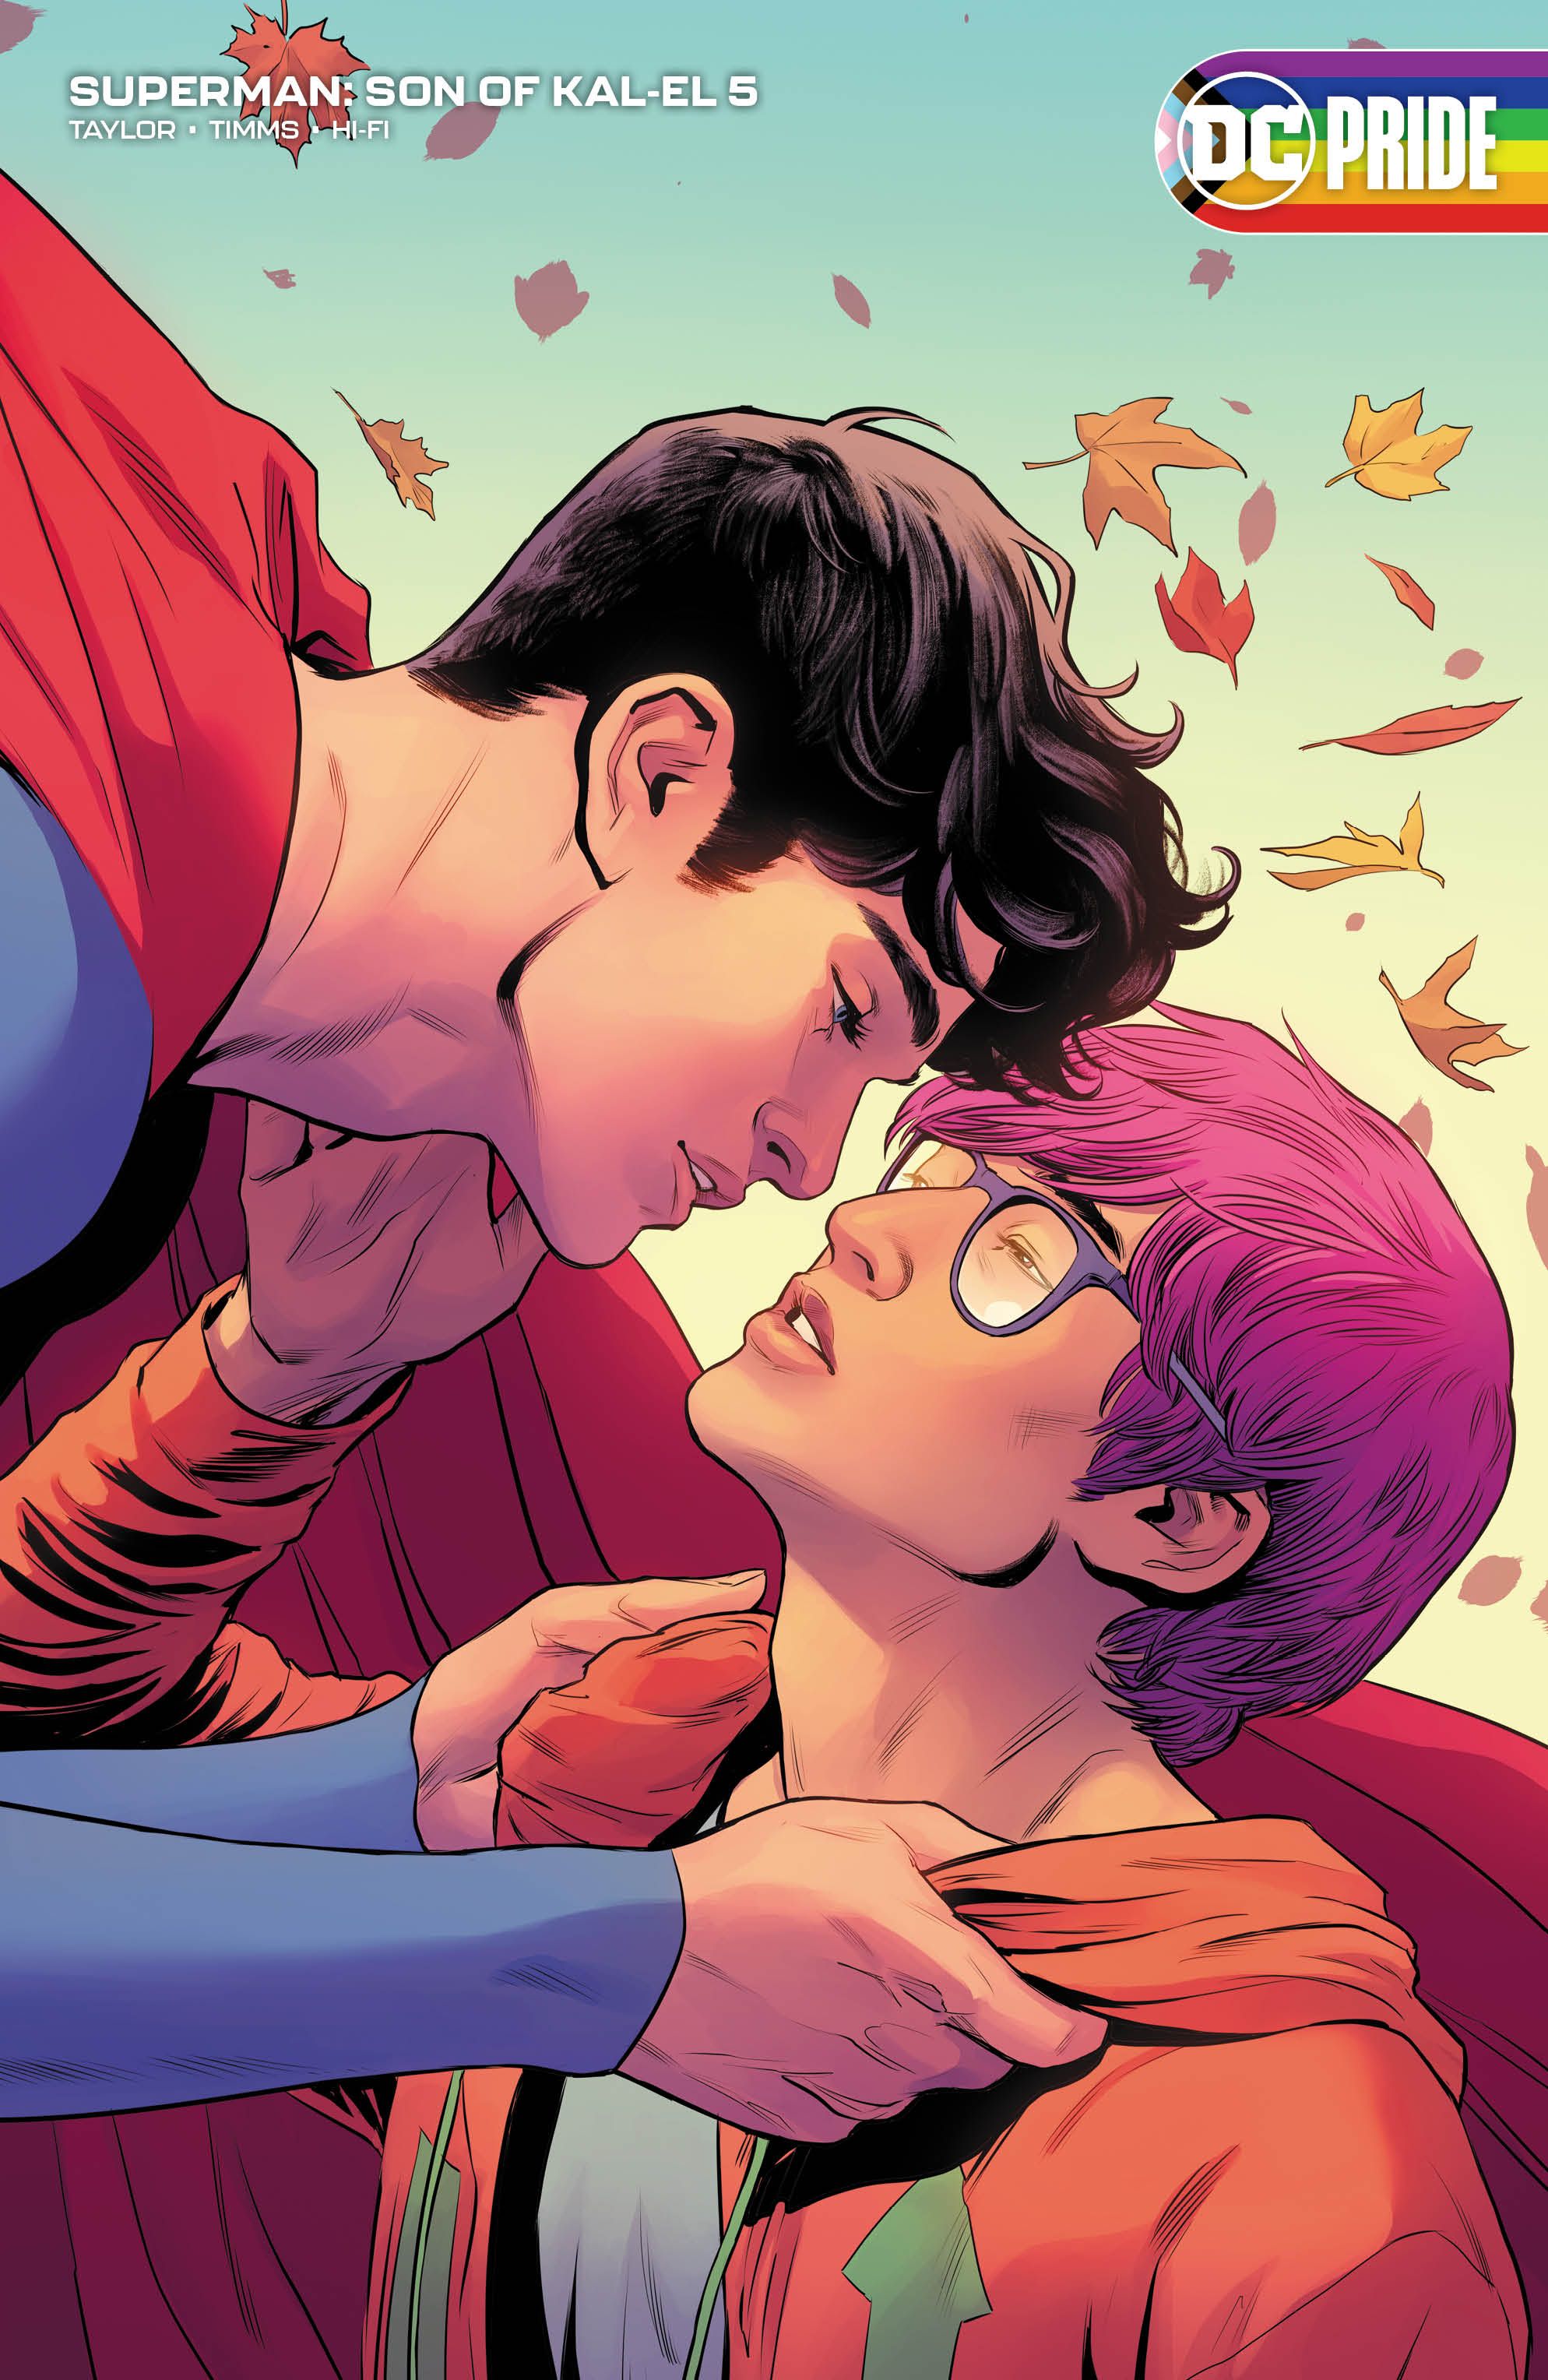 Jay Nakamura and Jon Kent on the cover of Superman Son of Kal El 5 by Travis Moore and Tamra Bonvillain